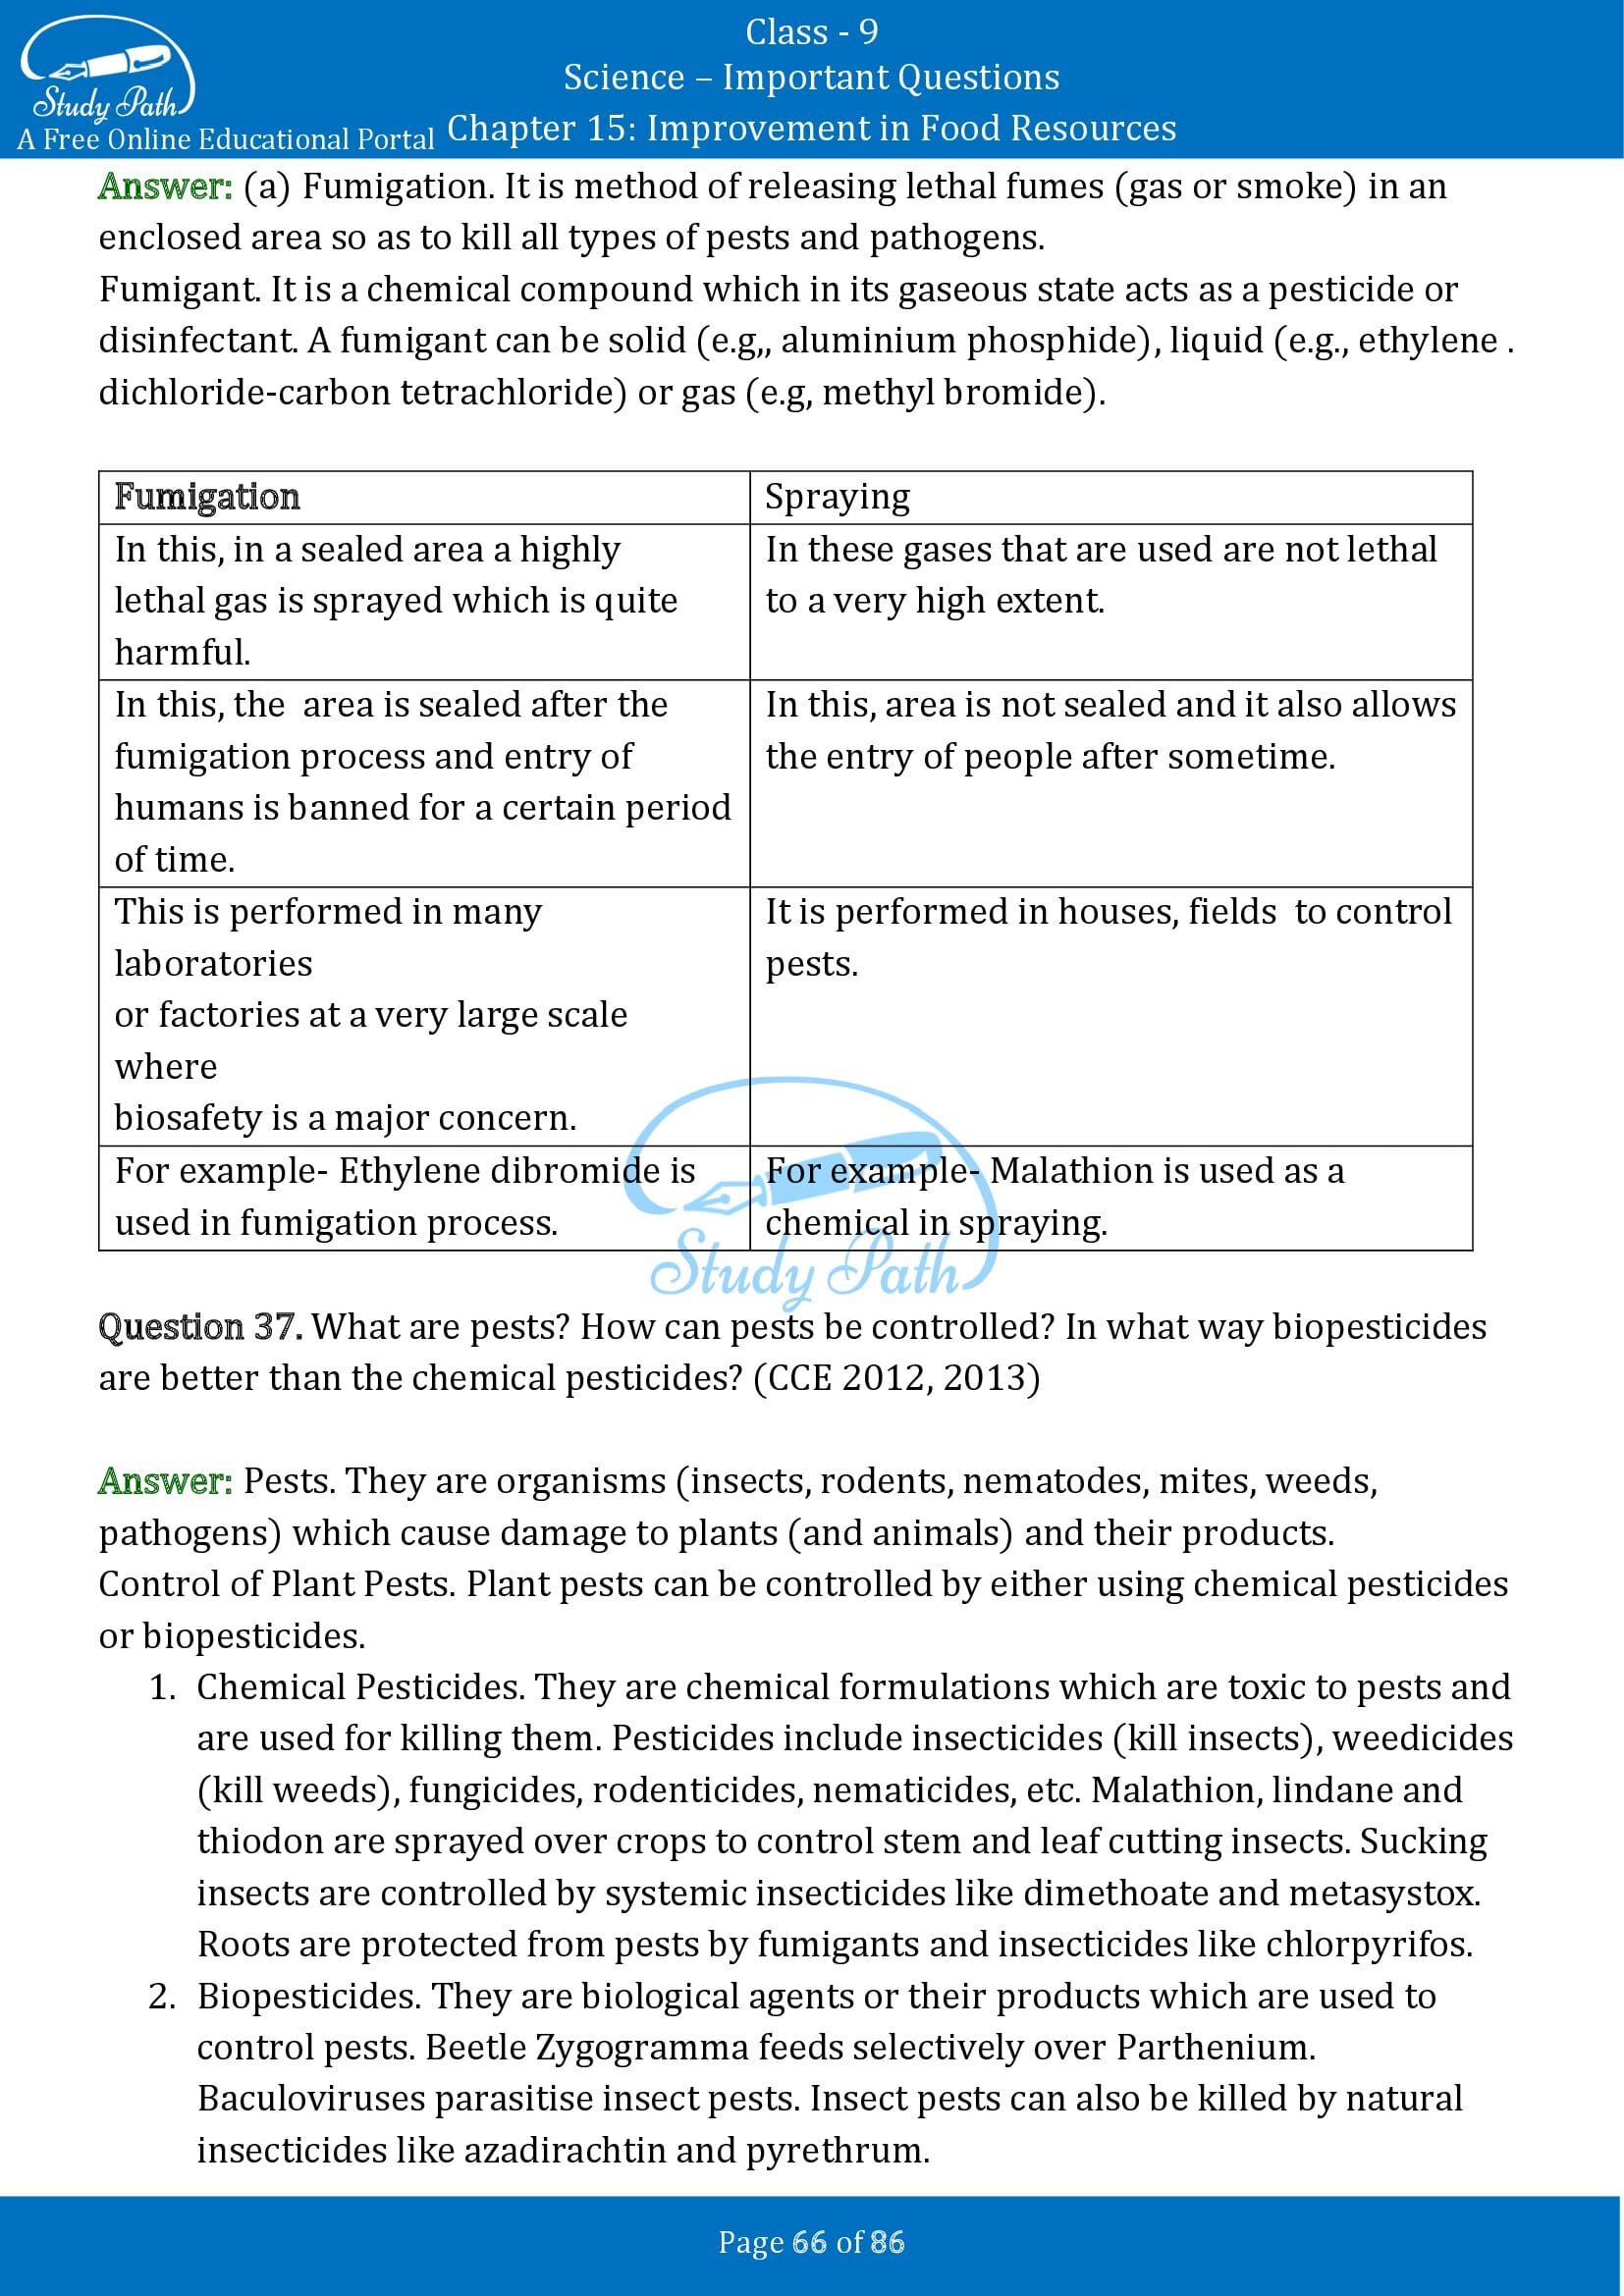 Important Questions for Class 9 Science Chapter 15 Improvement in Food Resources 00066